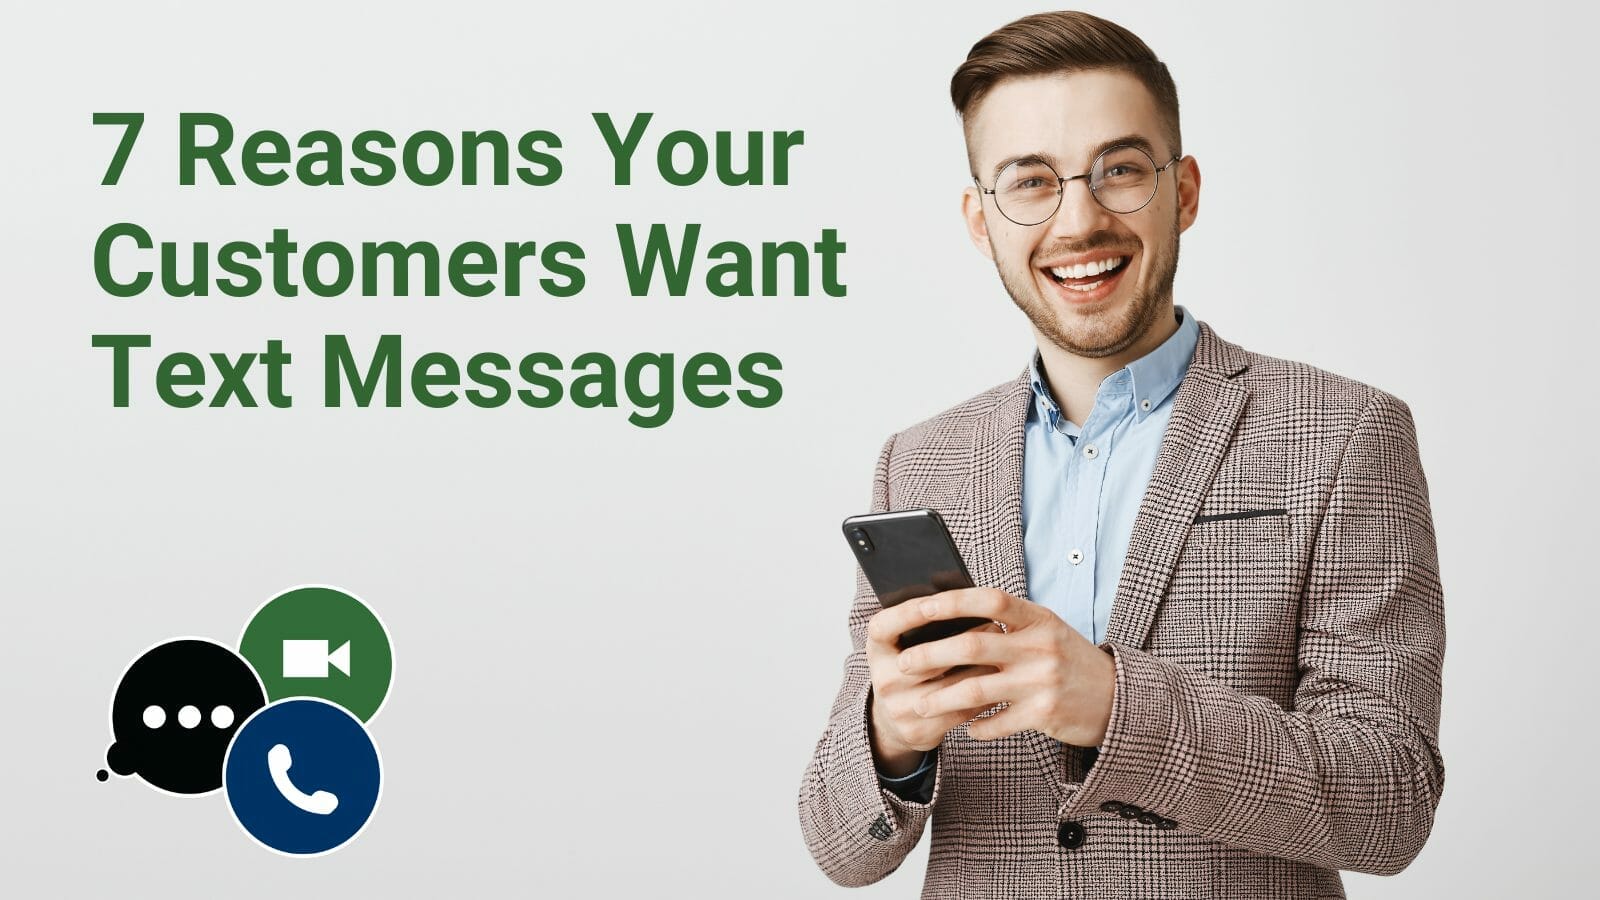 7 Reasons Why Your Customers Want Text Messages